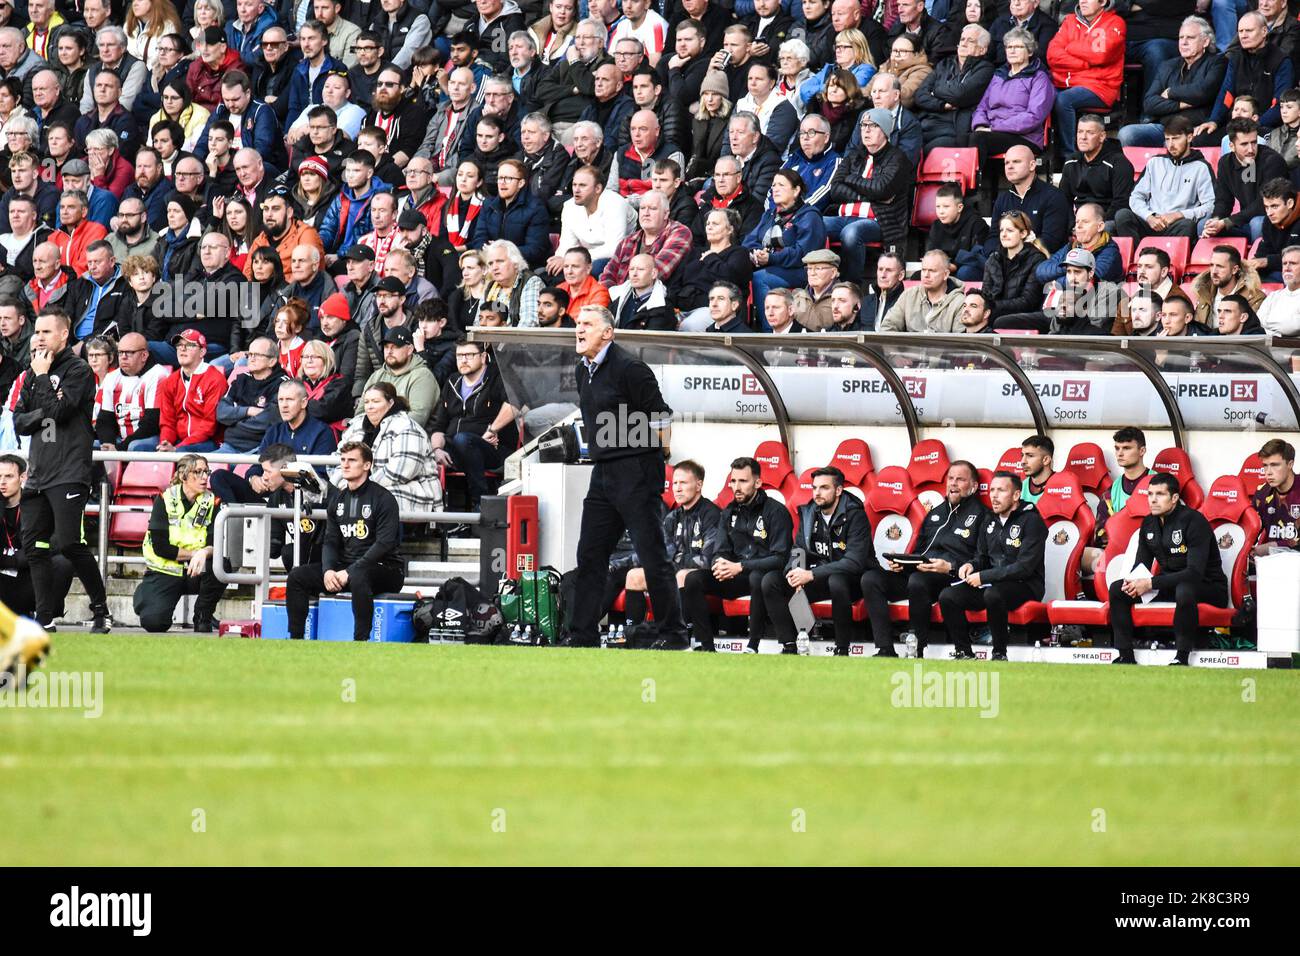 Sunderland AFC manager Tony Mowbray shouts instructions to his team during their game against Burnley. Stock Photo